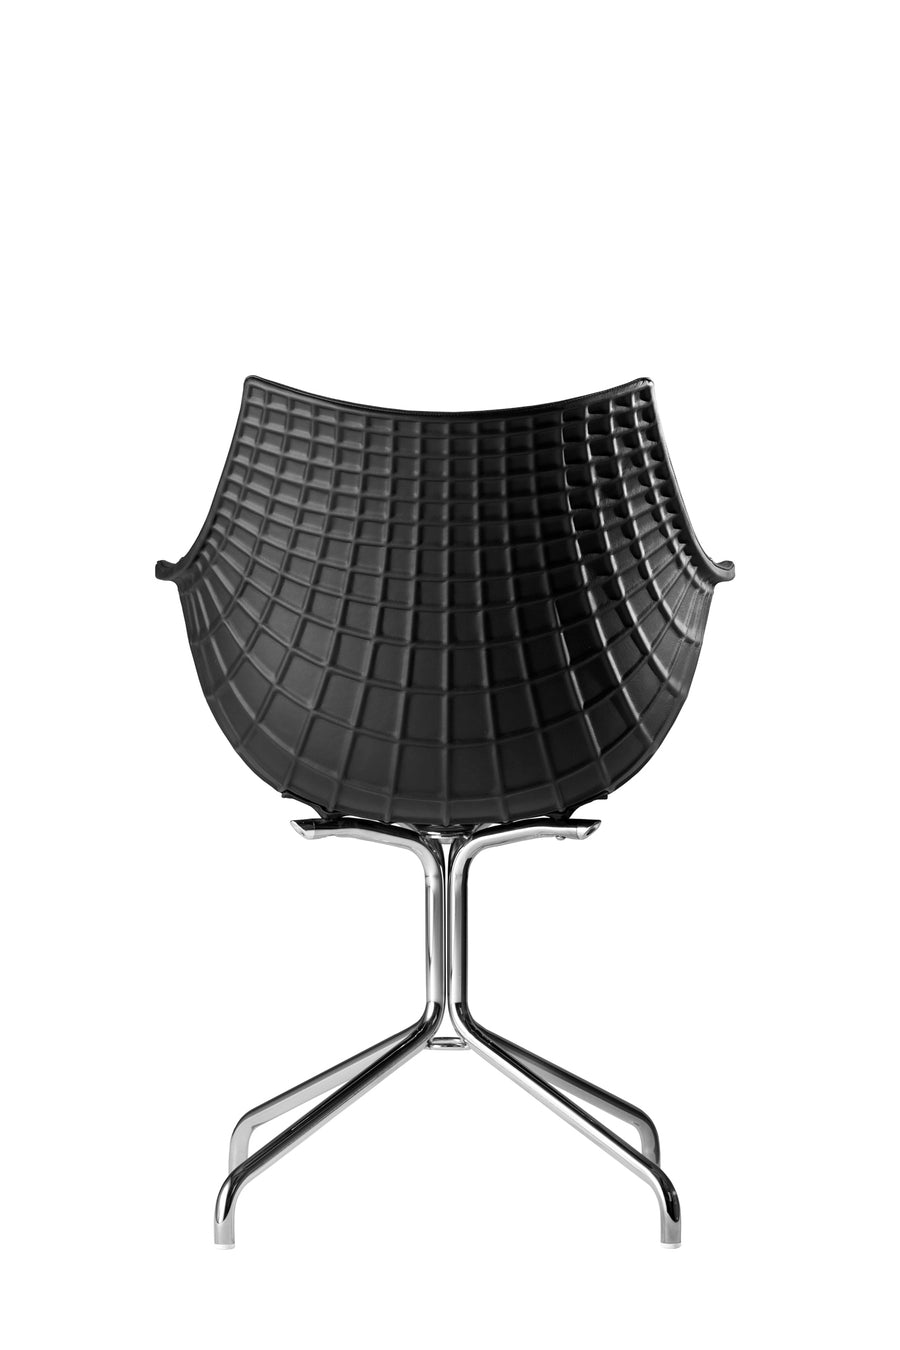 MERIDIANA Chair by Christophe Pillet for Driade - DUPLEX DESIGN